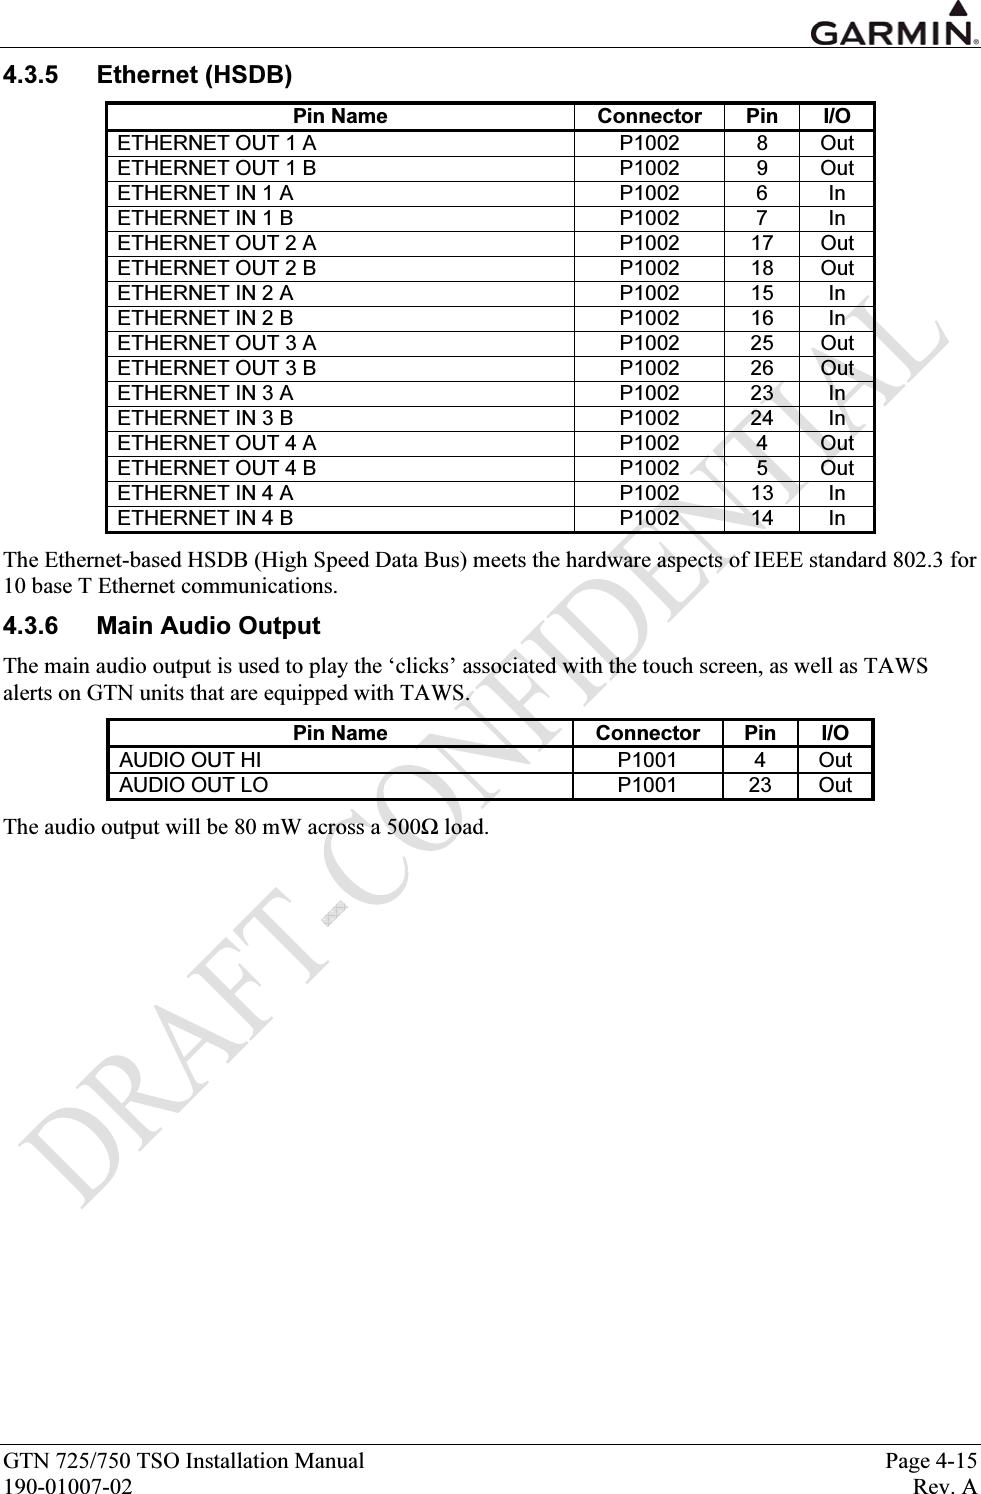  GTN 725/750 TSO Installation Manual  Page 4-15 190-01007-02  Rev. A 4.3.5 Ethernet (HSDB) Pin Name  Connector  Pin  I/O ETHERNET OUT 1 A  P1002  8  Out ETHERNET OUT 1 B  P1002  9  Out ETHERNET IN 1 A  P1002  6  In ETHERNET IN 1 B  P1002  7  In ETHERNET OUT 2 A  P1002  17  Out ETHERNET OUT 2 B  P1002  18  Out ETHERNET IN 2 A  P1002  15  In ETHERNET IN 2 B  P1002  16  In ETHERNET OUT 3 A  P1002  25  Out ETHERNET OUT 3 B  P1002  26  Out ETHERNET IN 3 A  P1002  23  In ETHERNET IN 3 B  P1002  24  In ETHERNET OUT 4 A  P1002  4  Out ETHERNET OUT 4 B  P1002  5  Out ETHERNET IN 4 A  P1002  13  In ETHERNET IN 4 B  P1002  14  In The Ethernet-based HSDB (High Speed Data Bus) meets the hardware aspects of IEEE standard 802.3 for 10 base T Ethernet communications. 4.3.6  Main Audio Output The main audio output is used to play the ‘clicks’ associated with the touch screen, as well as TAWS alerts on GTN units that are equipped with TAWS.  Pin Name  Connector  Pin  I/O AUDIO OUT HI  P1001  4  Out AUDIO OUT LO  P1001  23  Out The audio output will be 80 mW across a 500Ω load.   